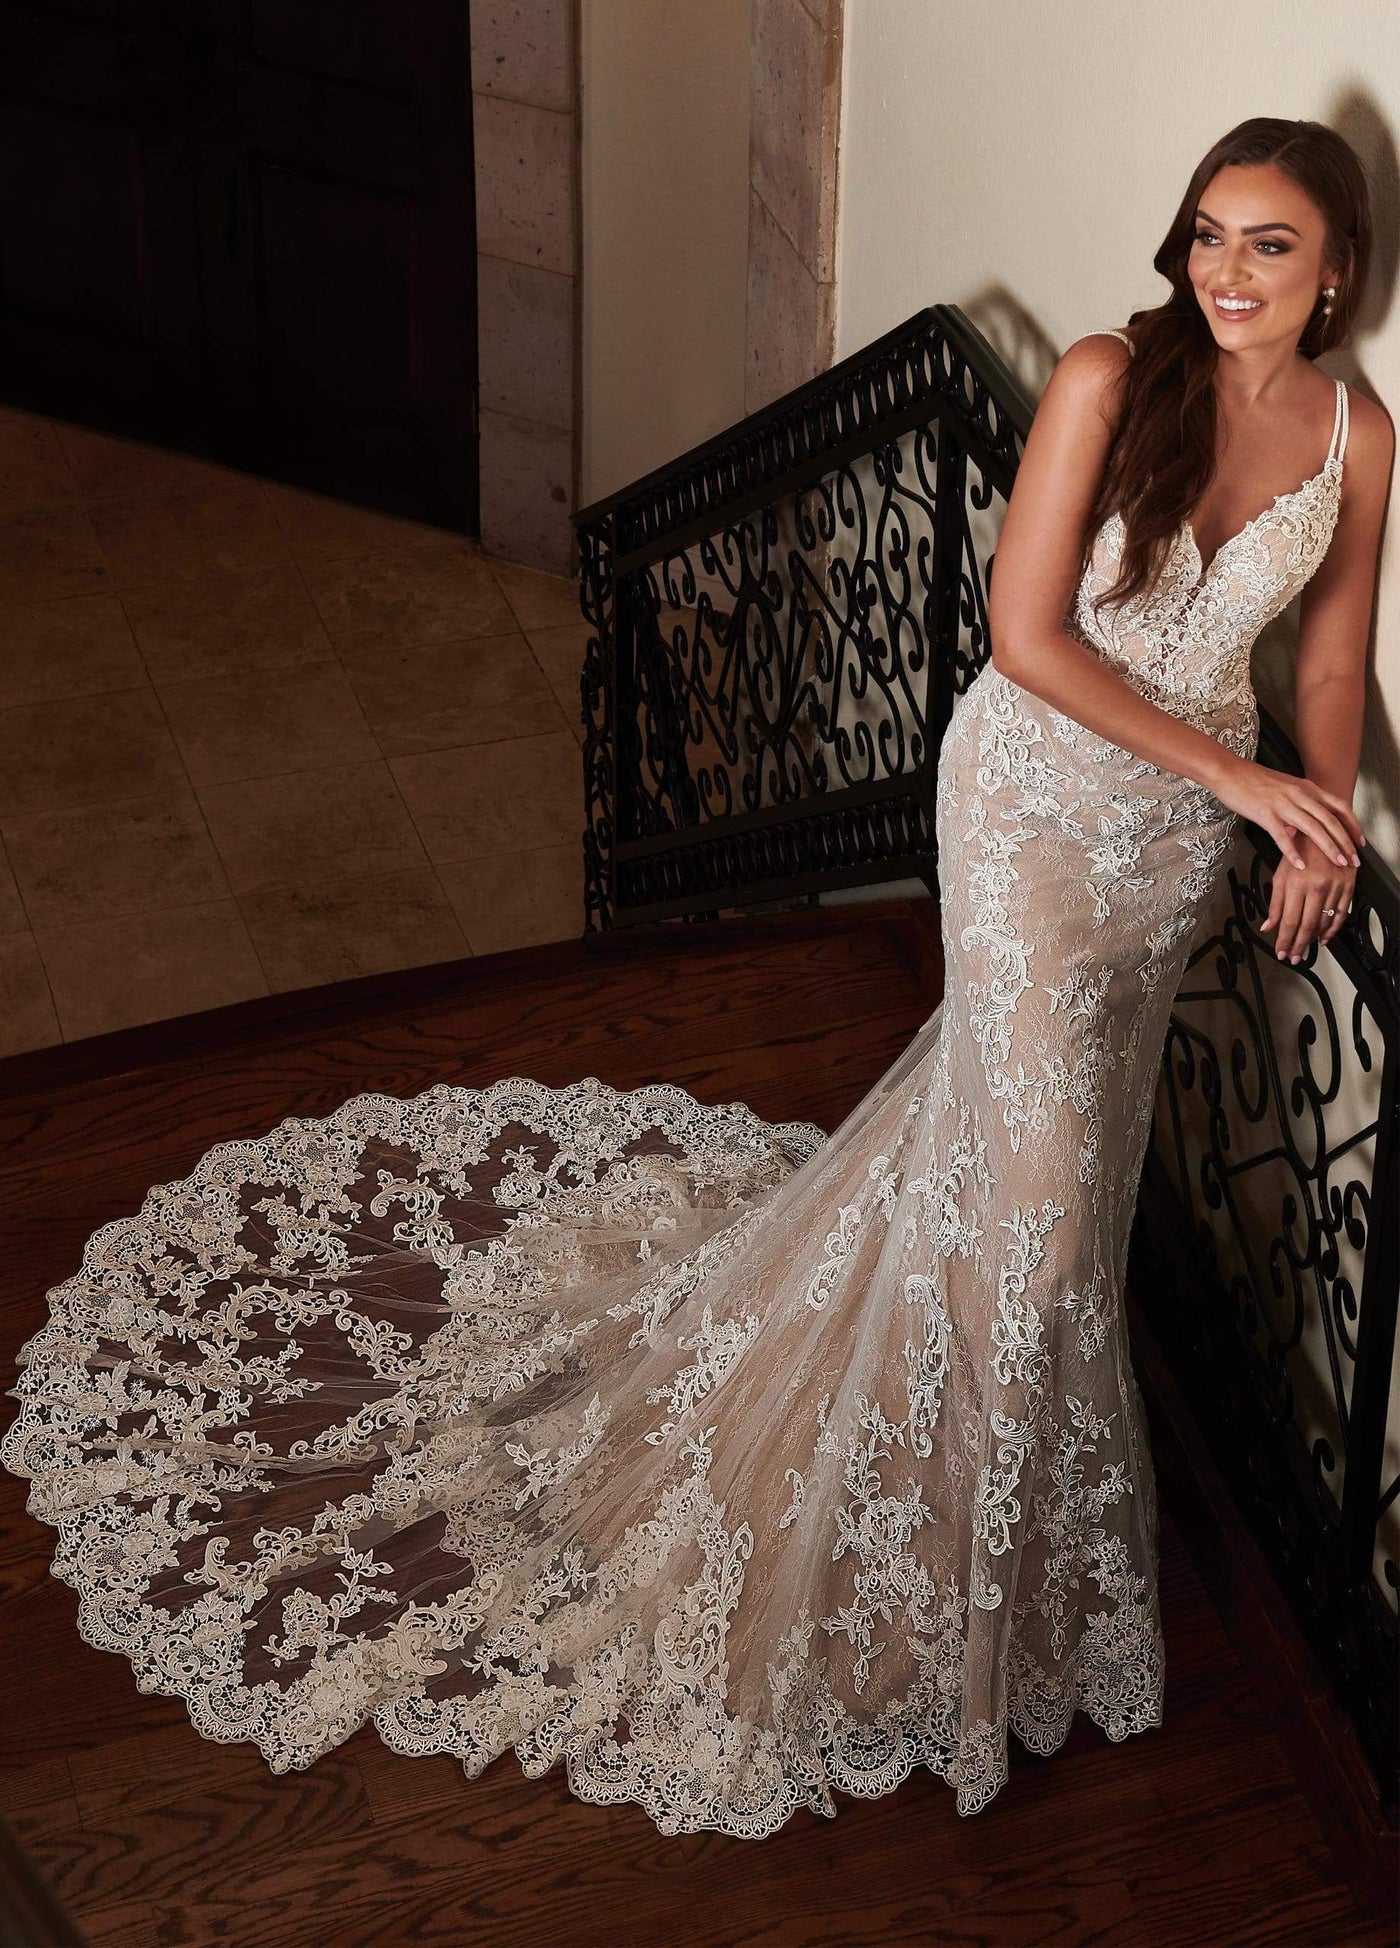 Lo'Adoro Bridal By Rachel Allan - M755 Plunging V Neck Lace Tule Gown Wedding Dresses